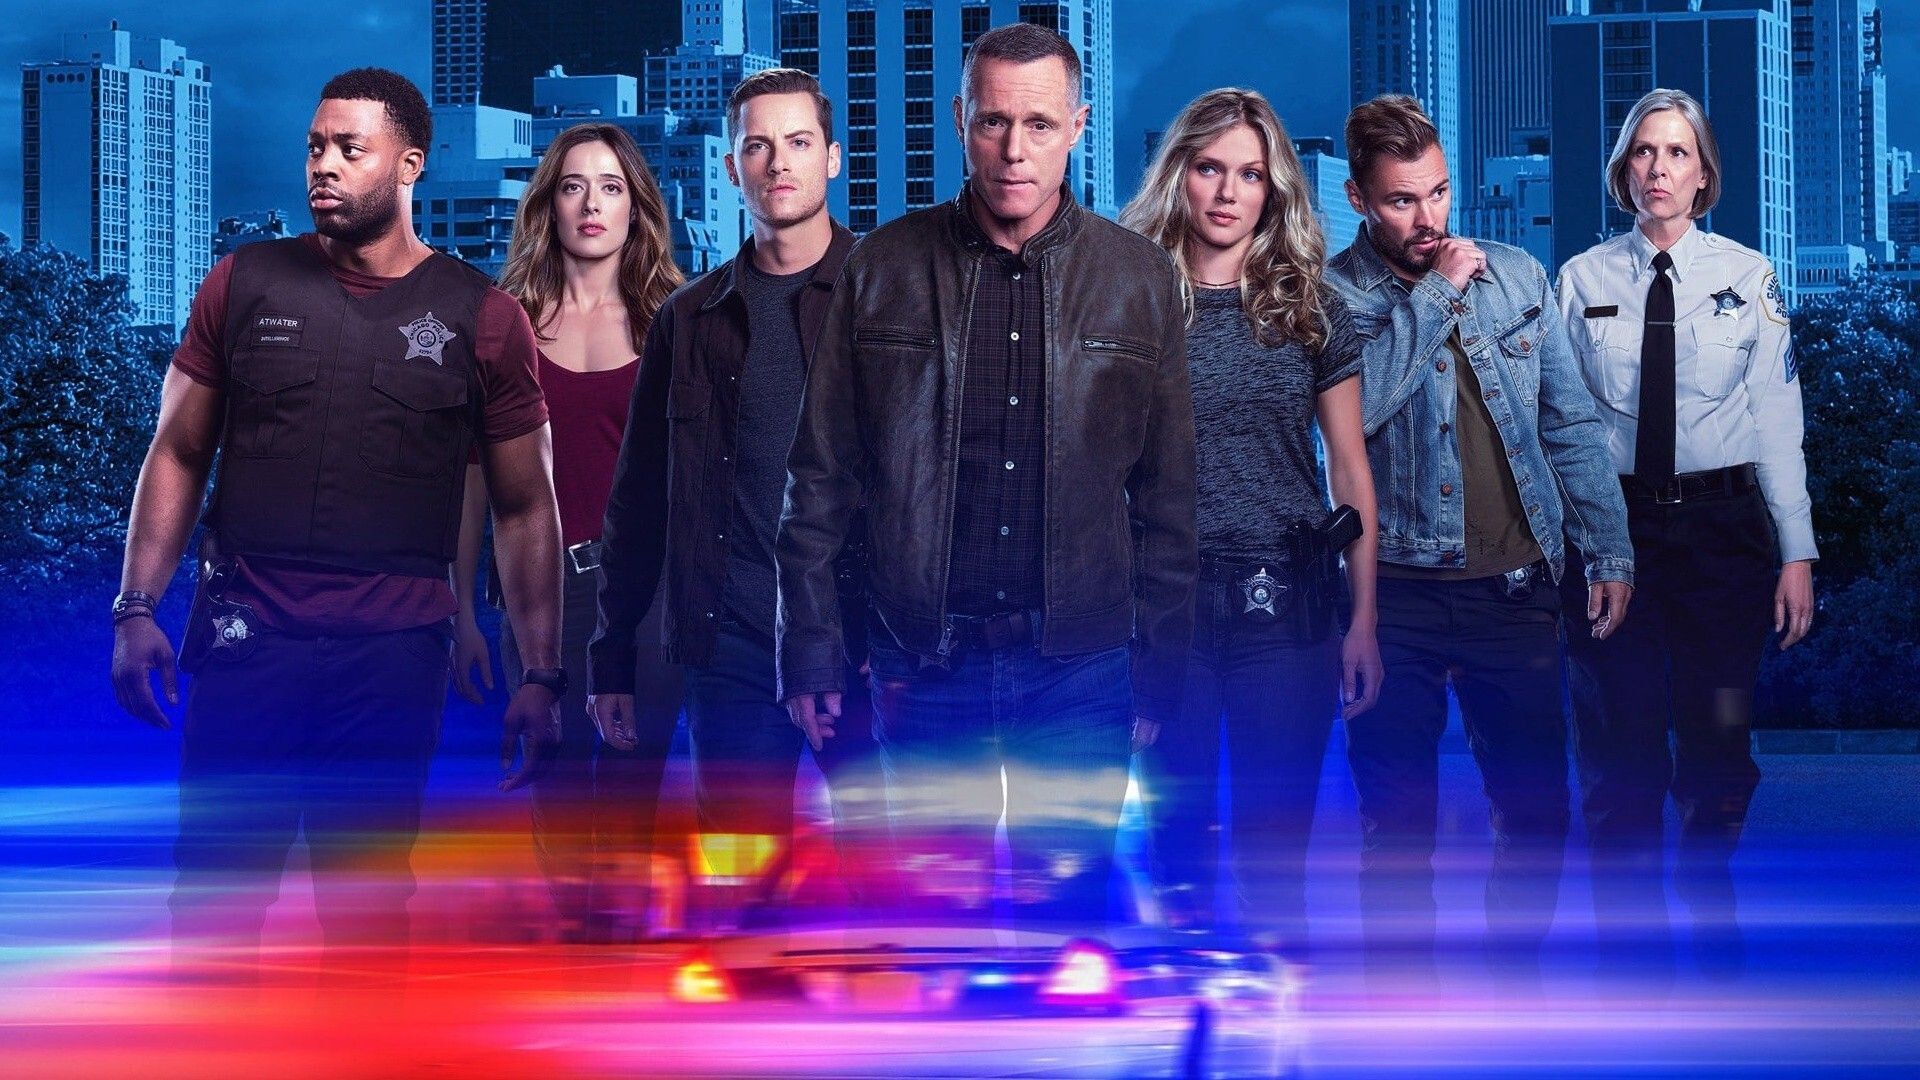 Chicago P.D. (TV Series): A Spin-Off Of "Chicago Fire" And "Chicago Med" Shows, Crossover Characters. 1920x1080 Full HD Background.